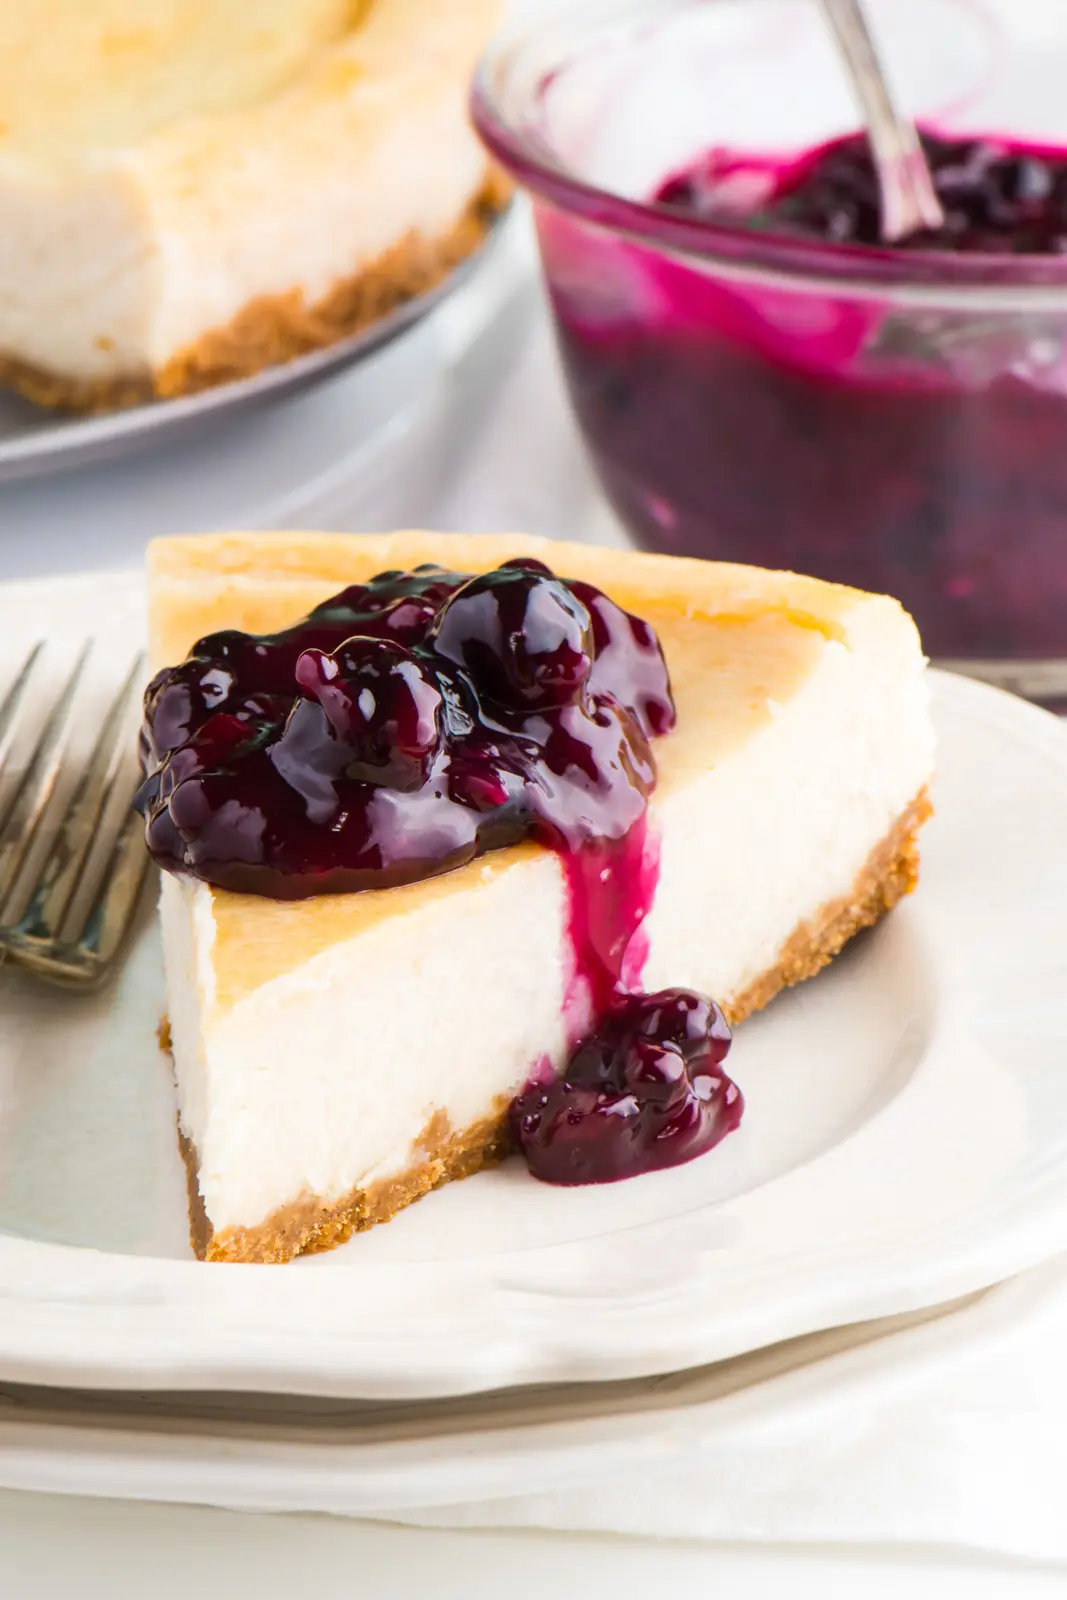 A slice of vegan New York style cheesecake sits on a plate with blueberry sauce over the top.